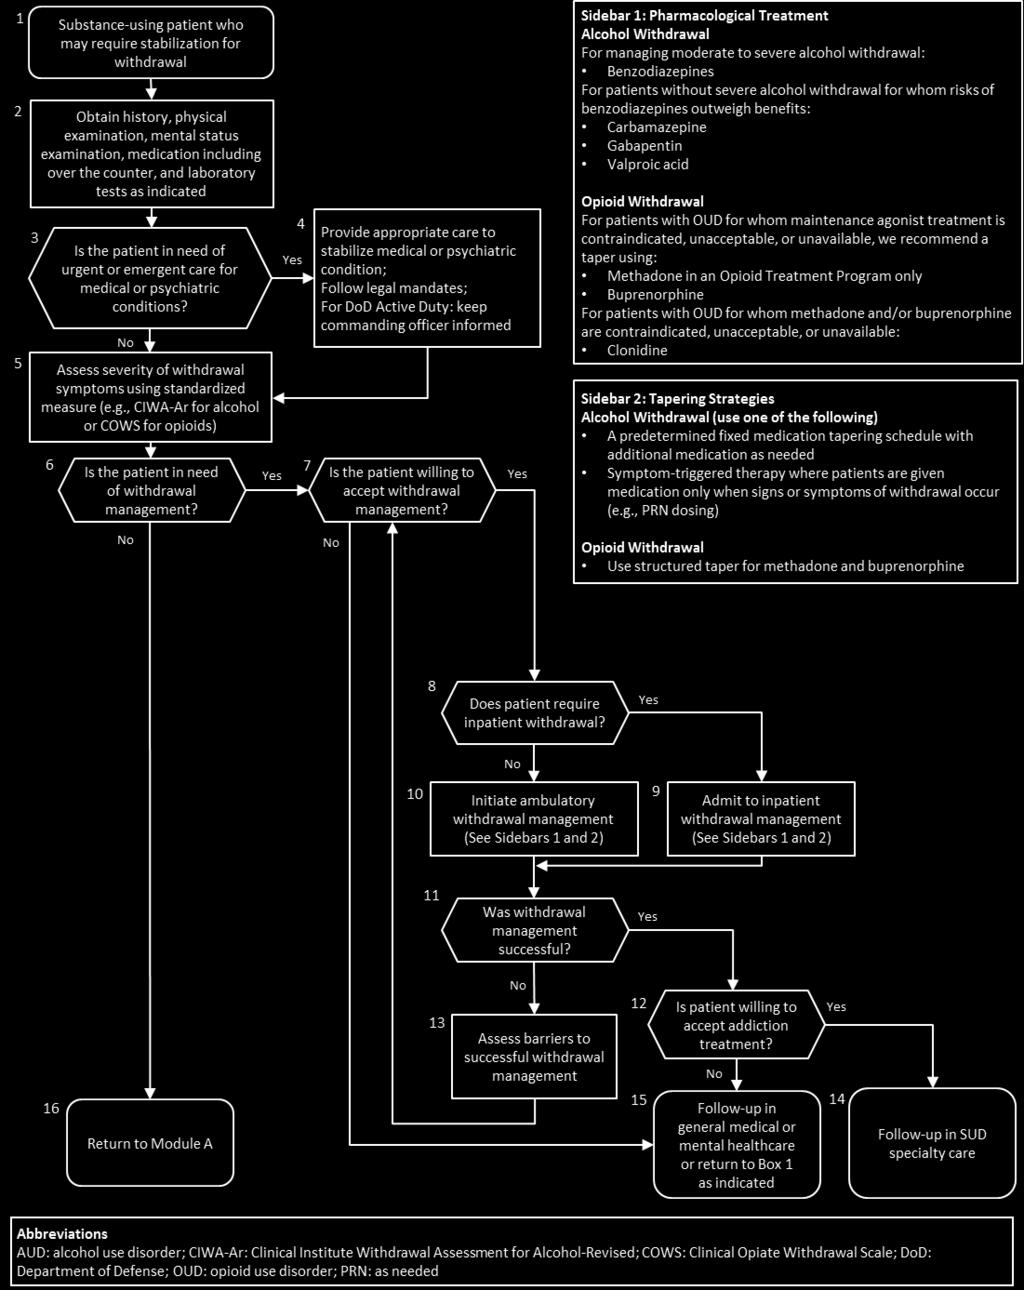 VA/DoD Clinical Practice Guideline for the Management of